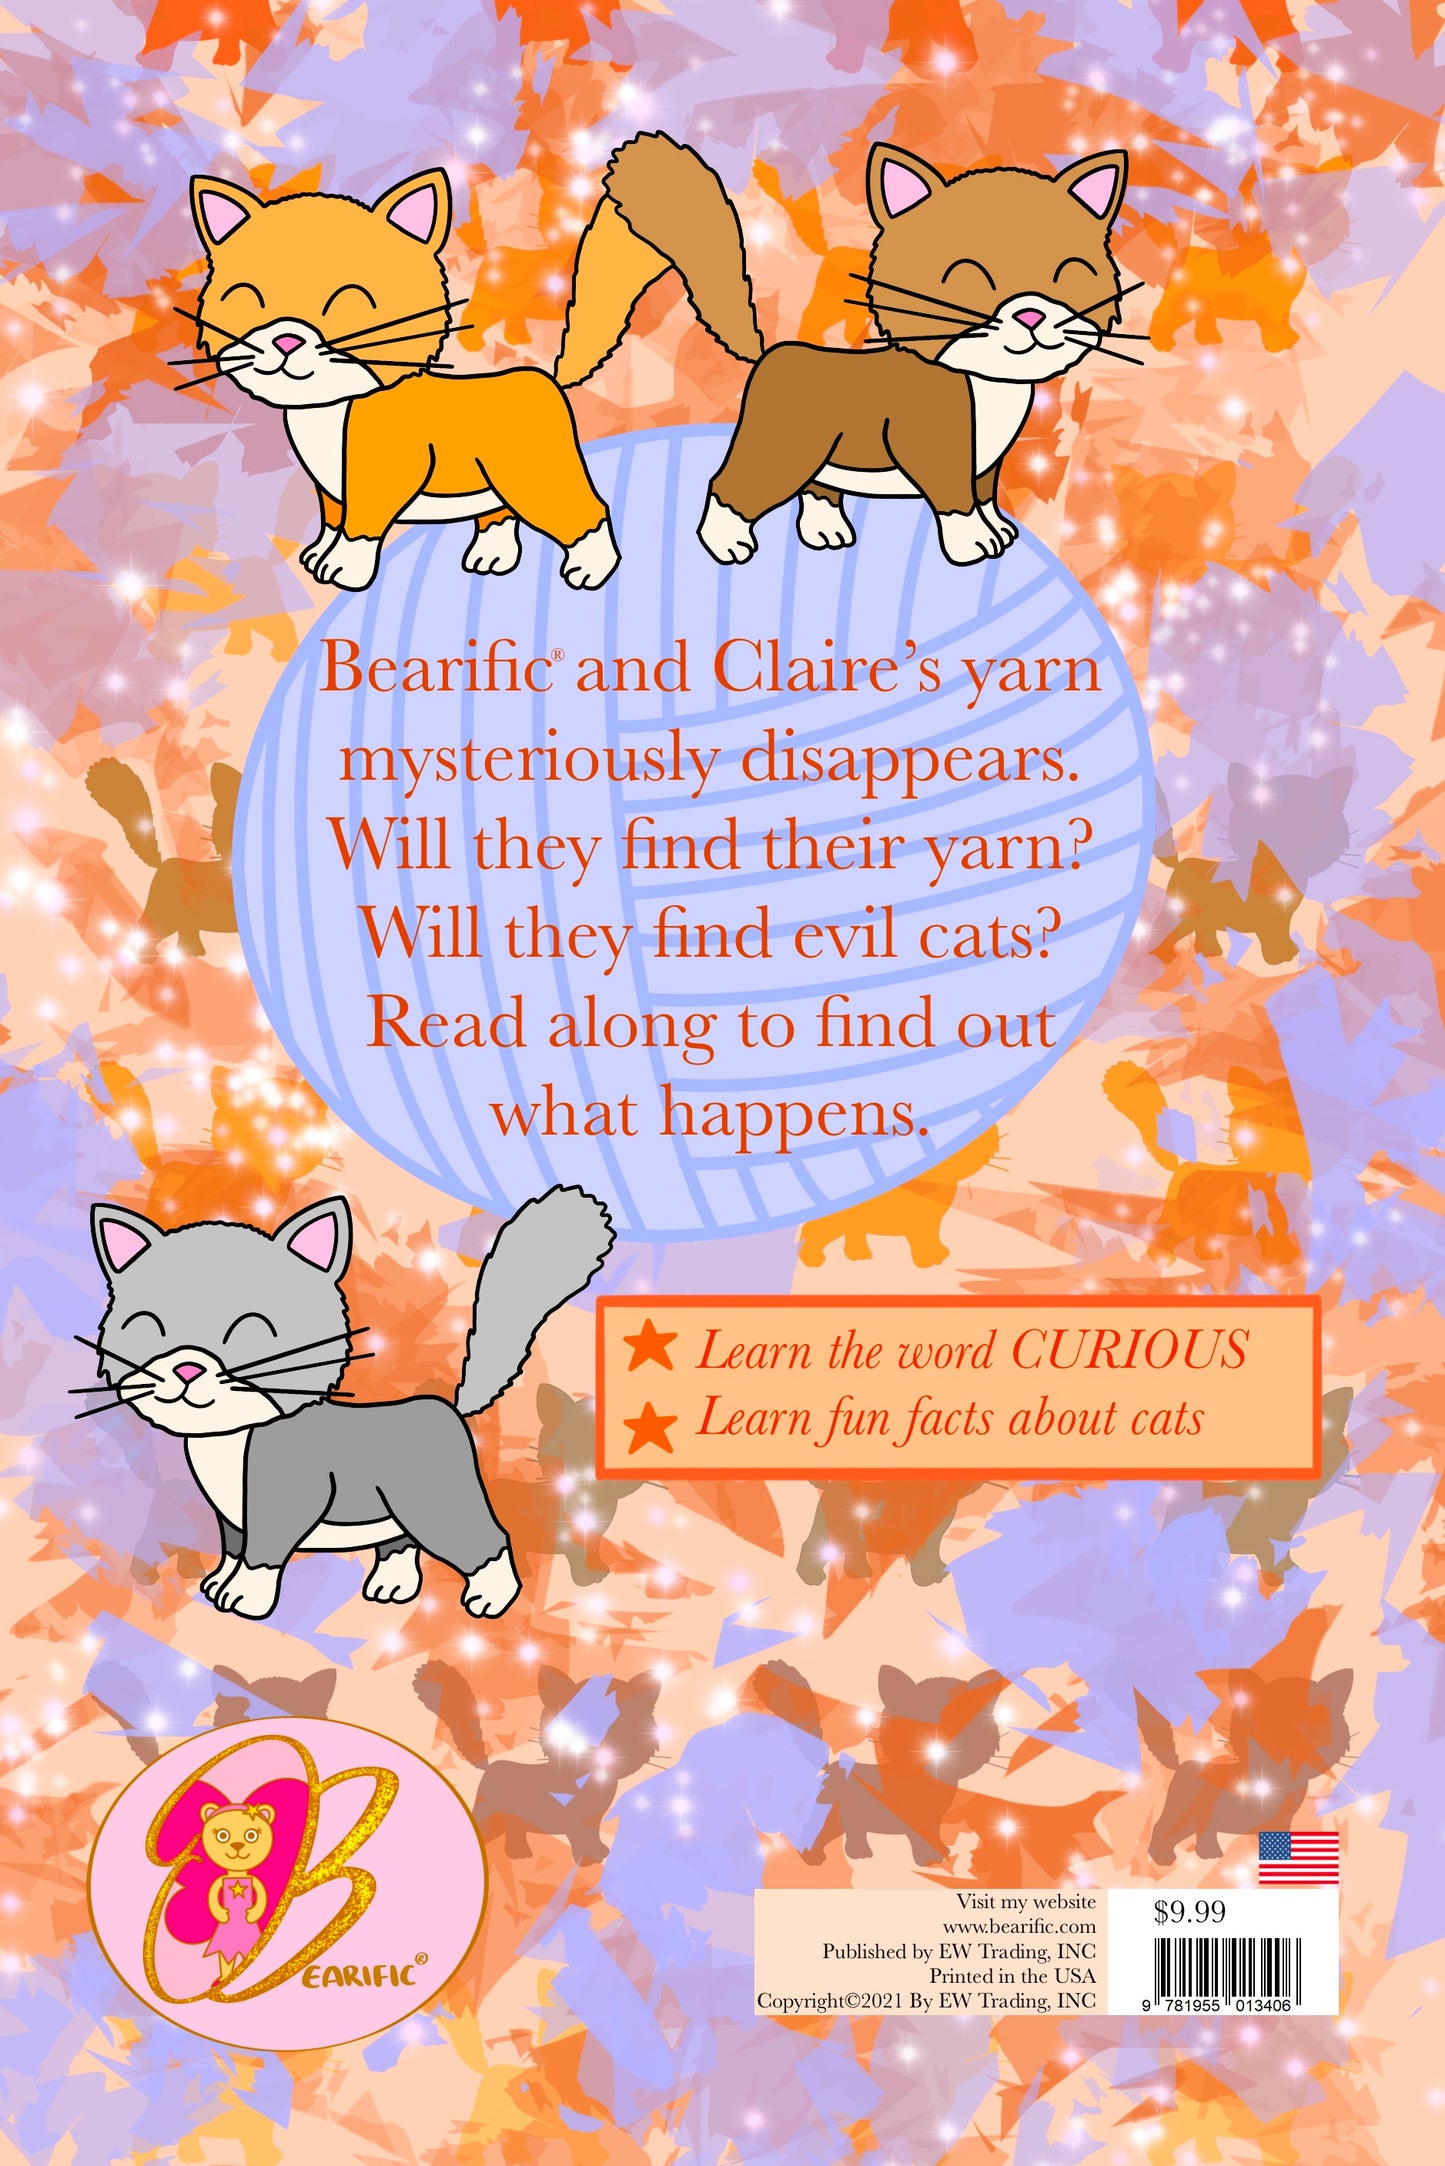 Bearific and the Curious Cats